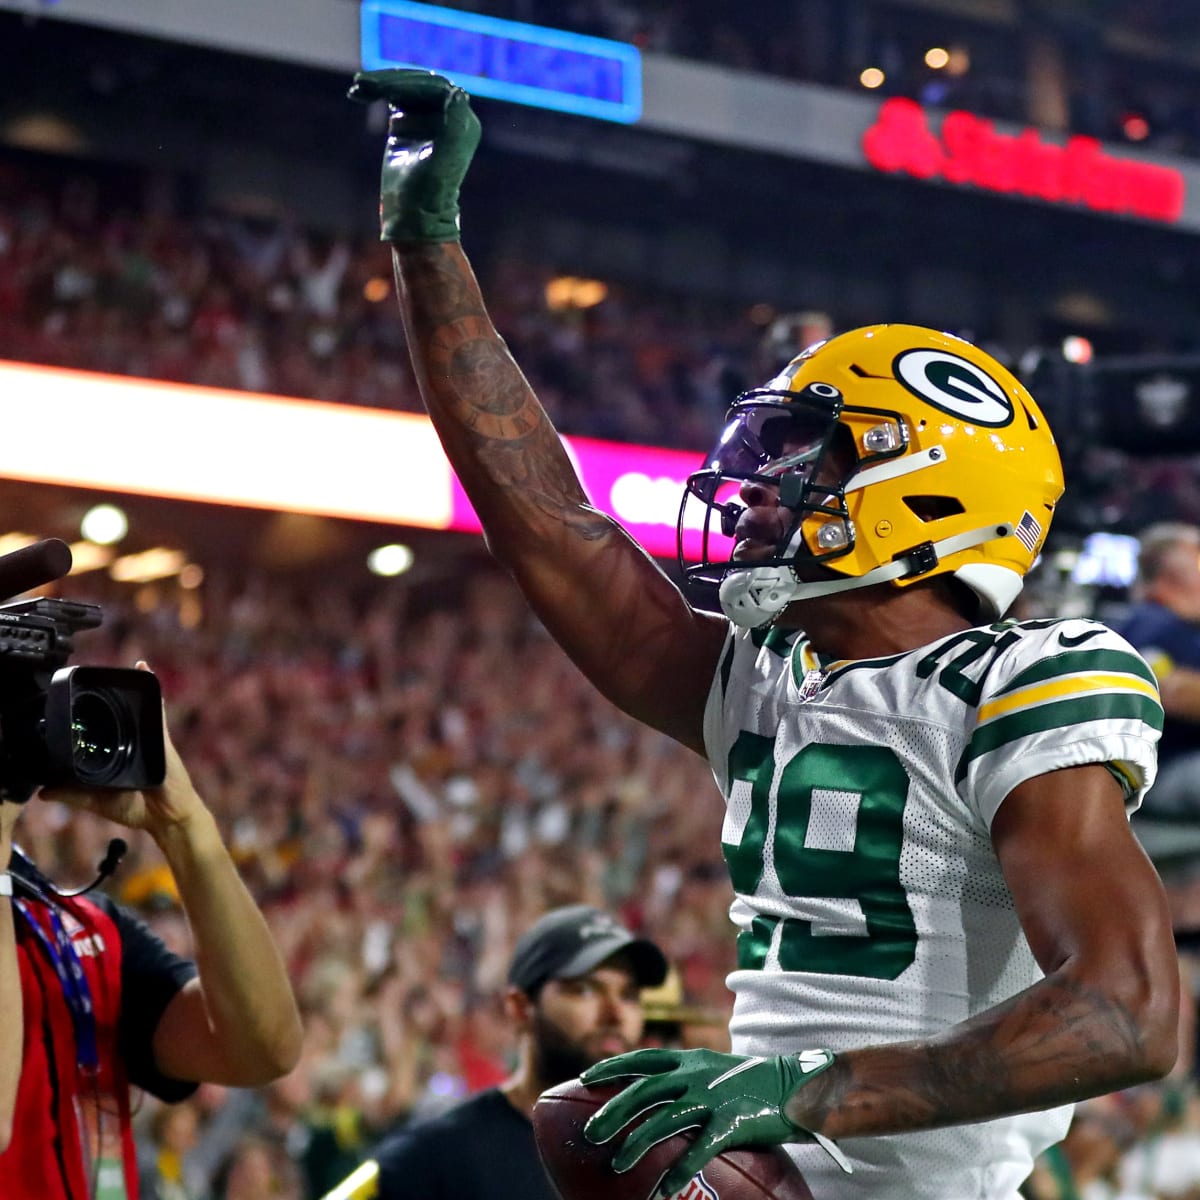 Green Bay Packers at the Bye: Jaire Alexander and the Cornerbacks